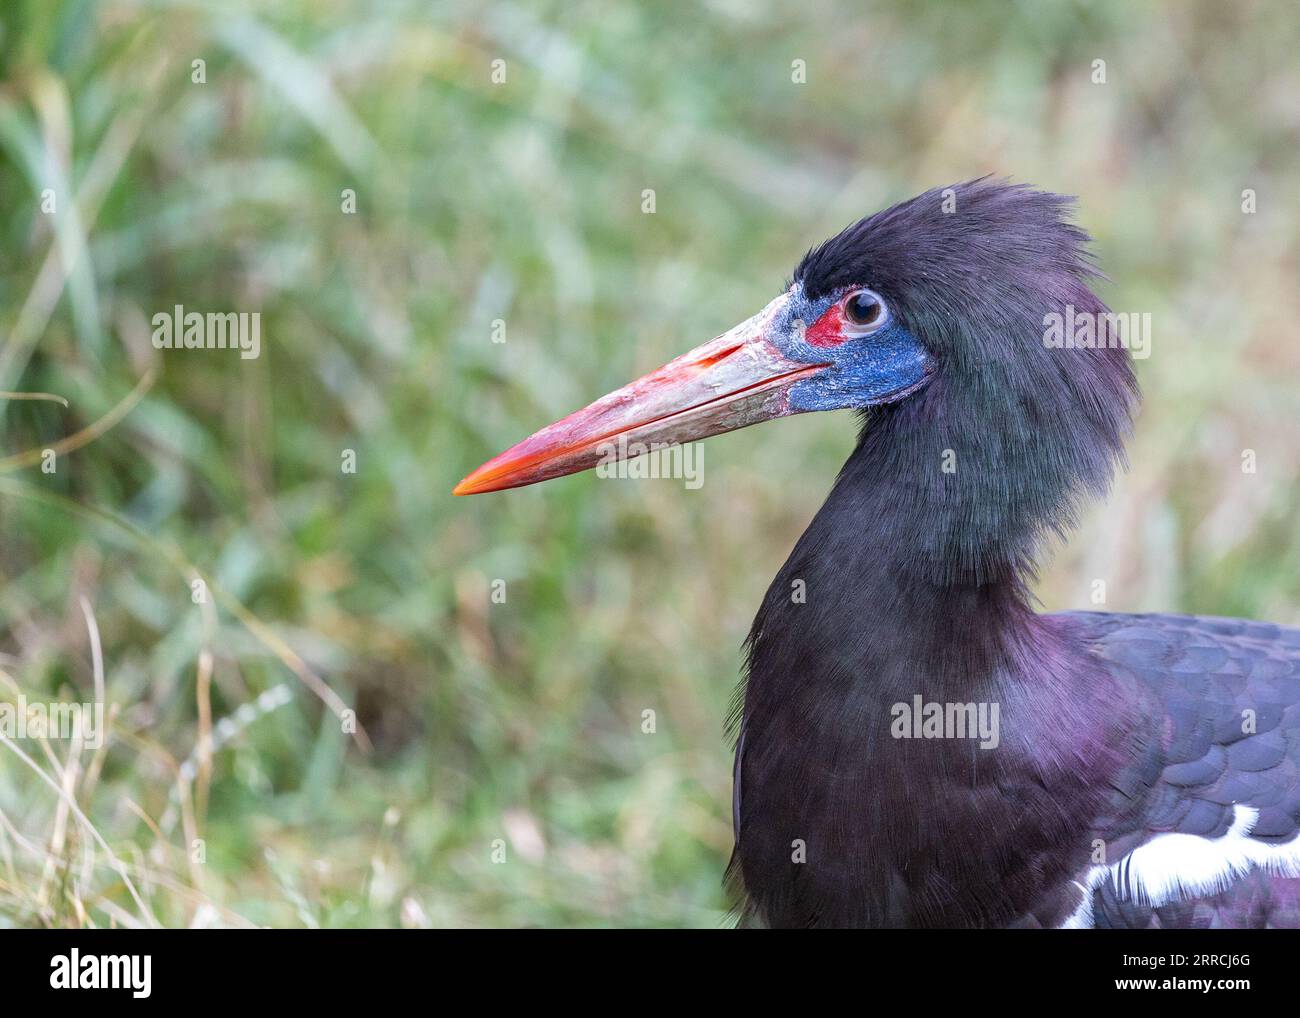 Abdim's Stork, Ciconia abdimii, a migratory bird found in the grasslands and savannas of Africa, with distinctive black and white plumage and fascinat Stock Photo